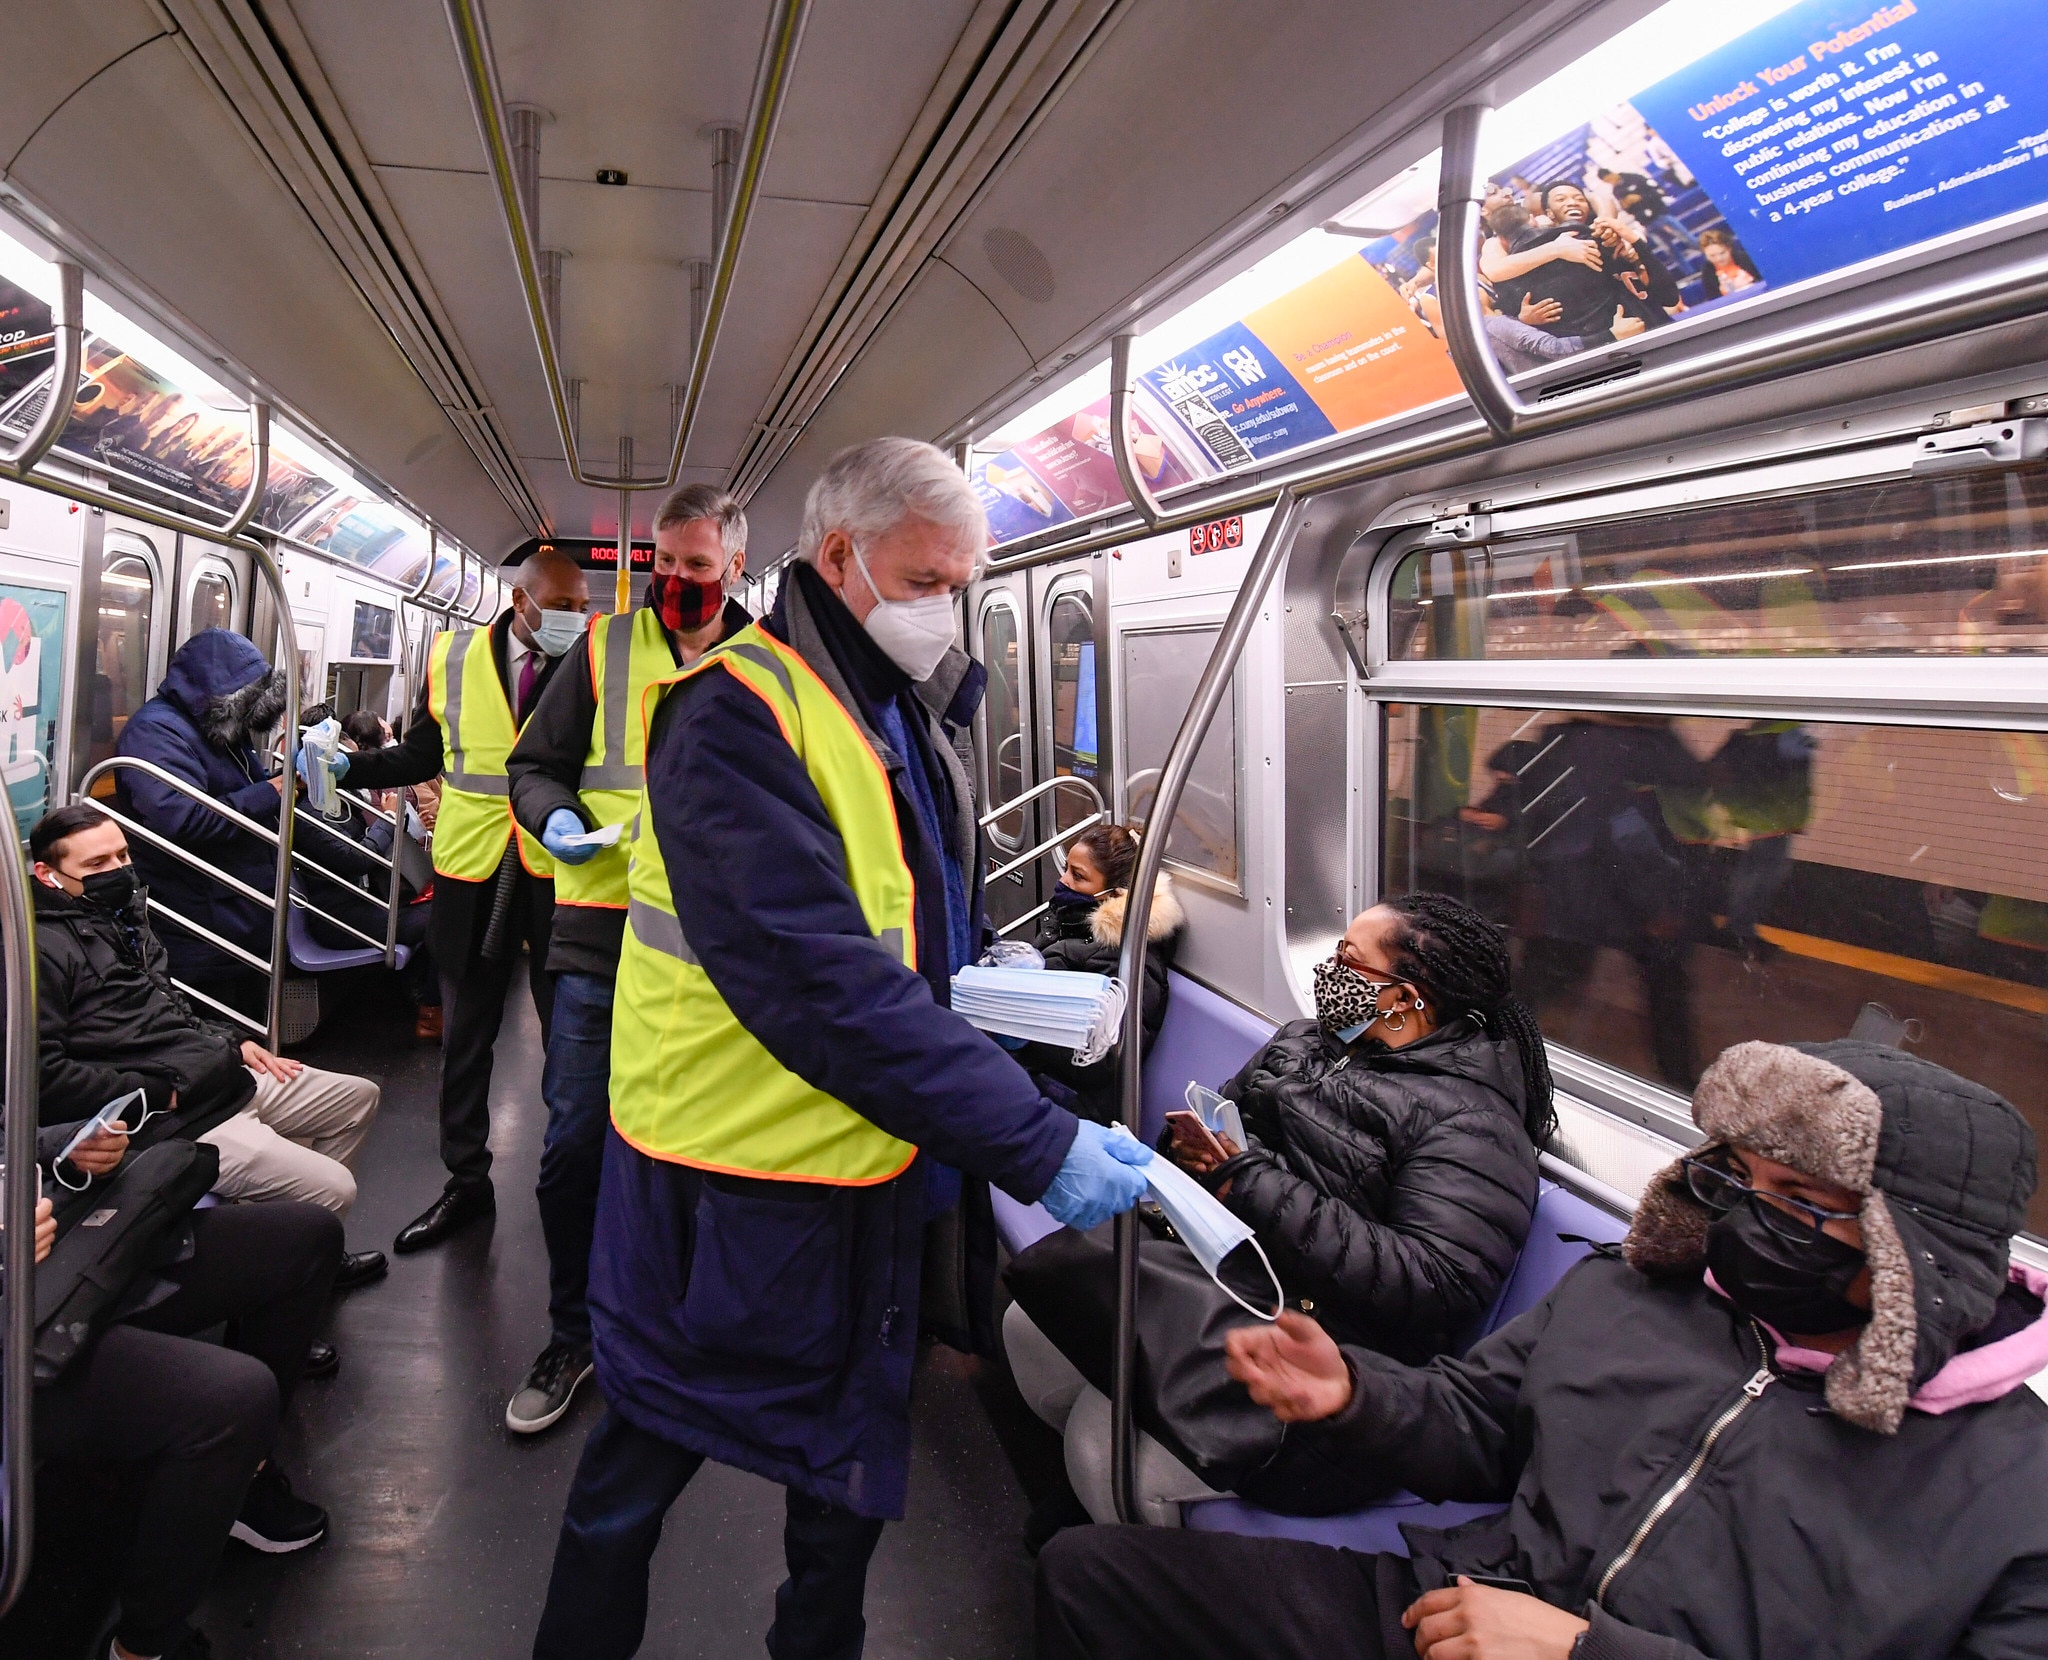 MTA Reminds Customers to Wear a Mask While Riding Trains and Buses